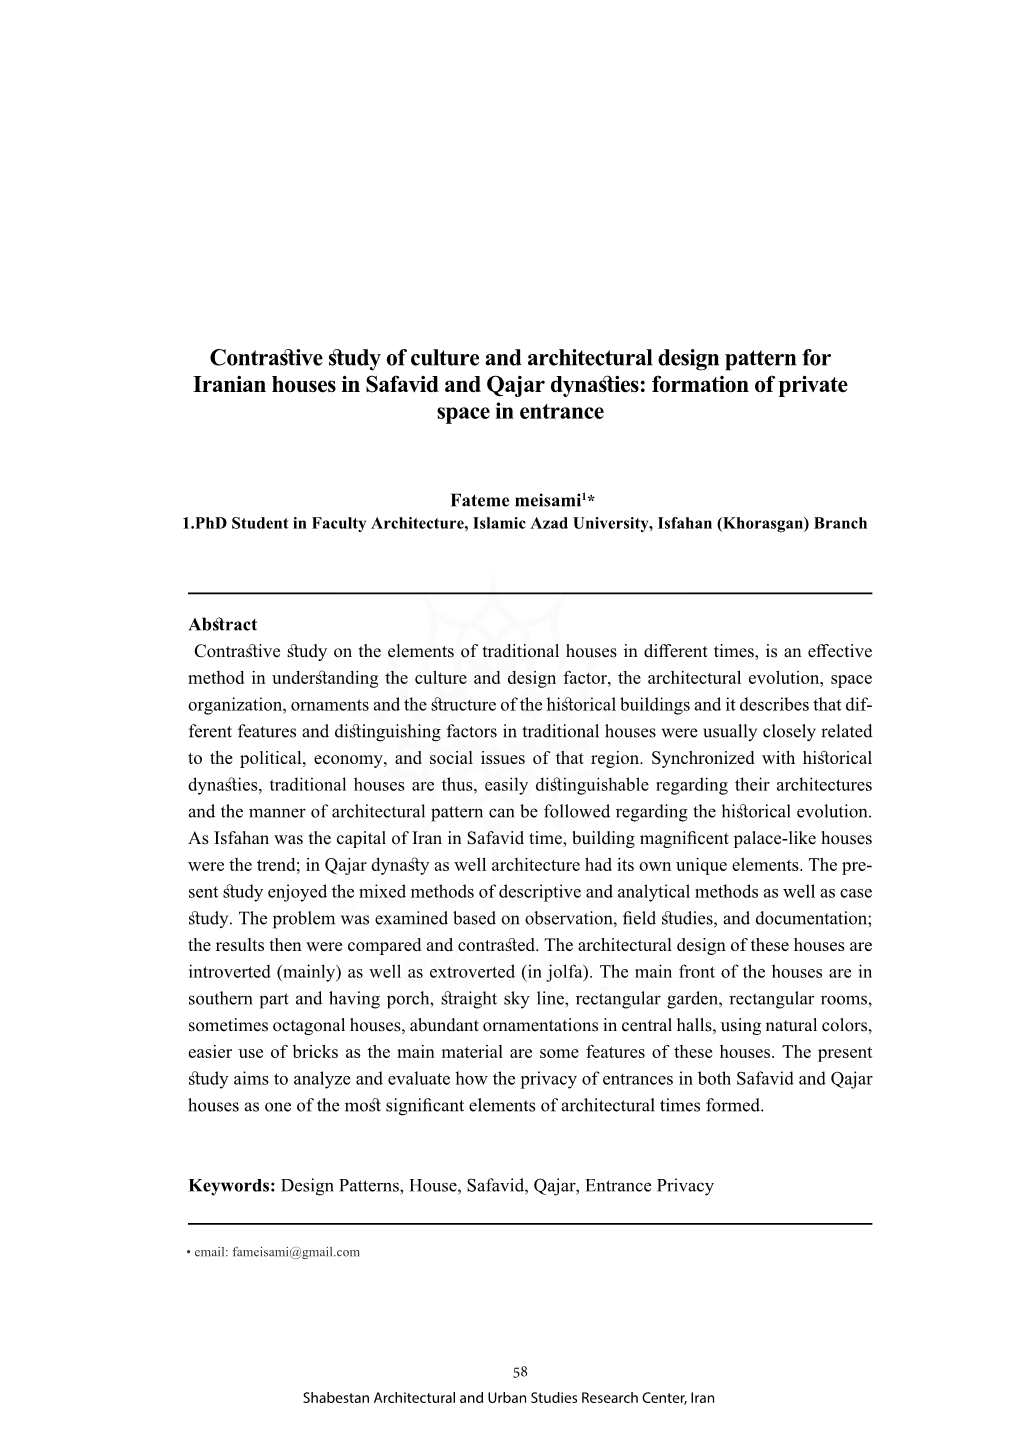 Contrastive Study of Culture and Architectural Design Pattern for Iranian Houses in Safavid and Qajar Dynasties: Formation of Private Space in Entrance